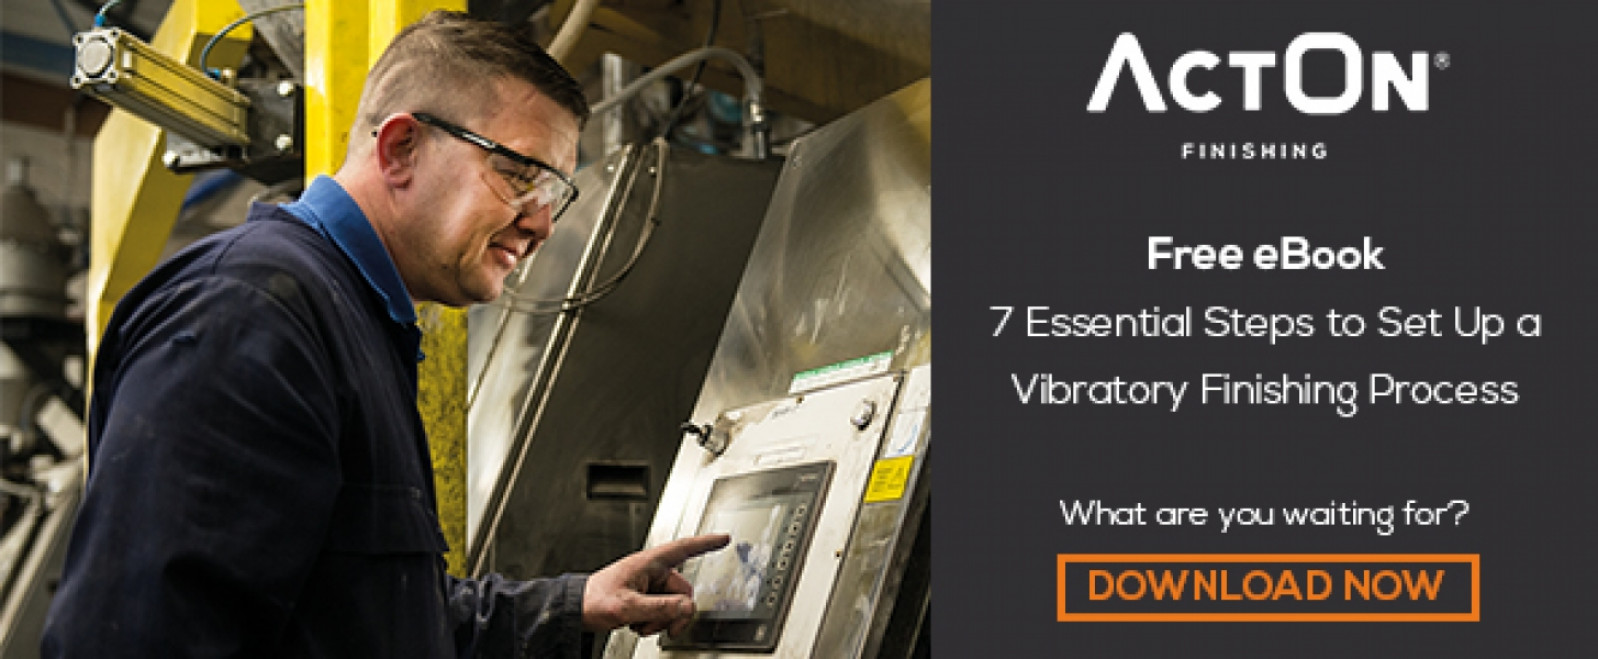 7 Essential Steps to Set Up a Vibratory Finishing Process